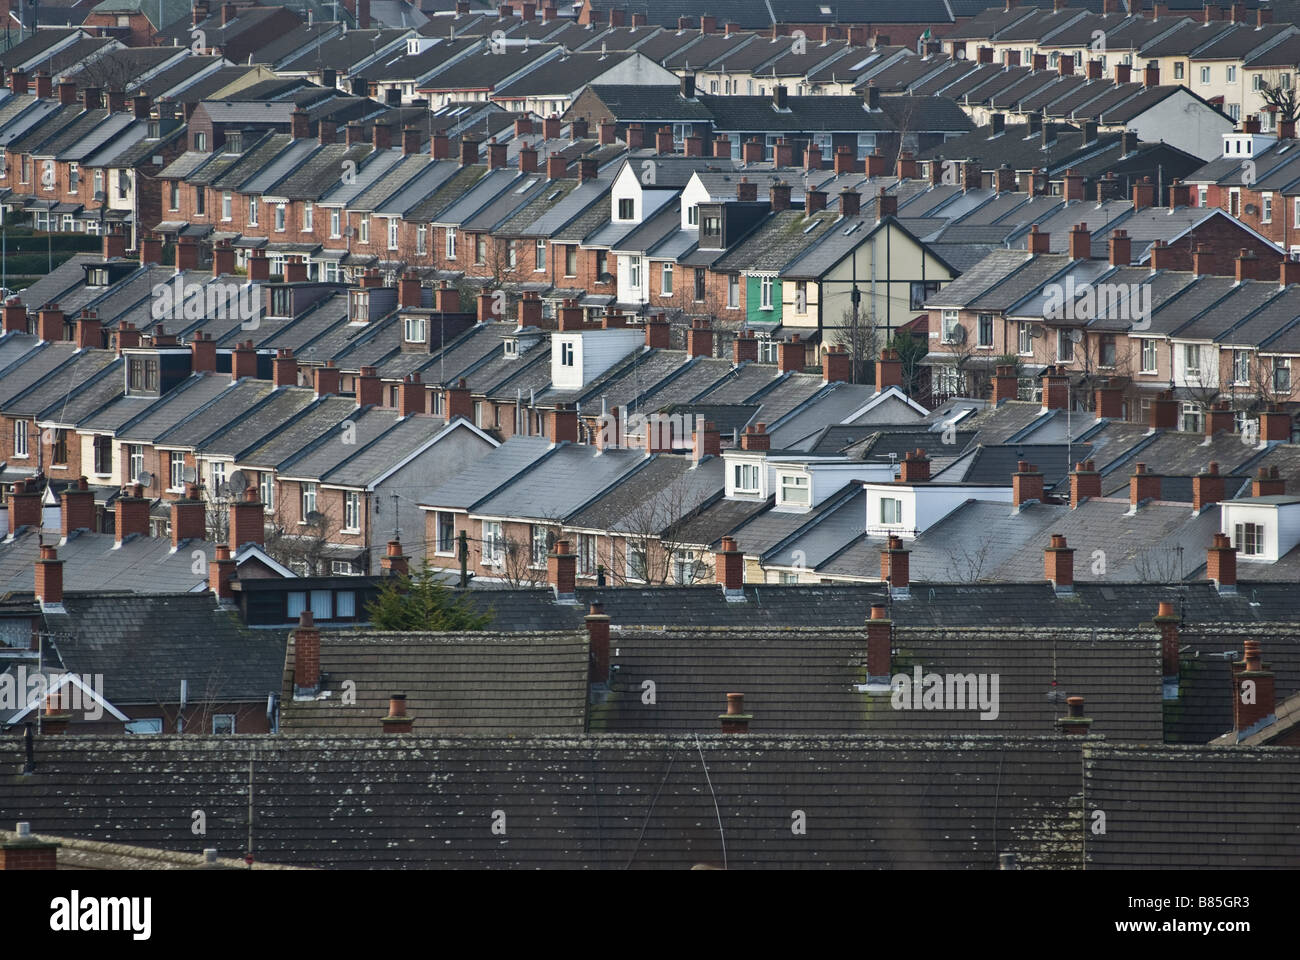 Green house amongst the terraced streets of the Ardoyne North Belfast. Stock Photo